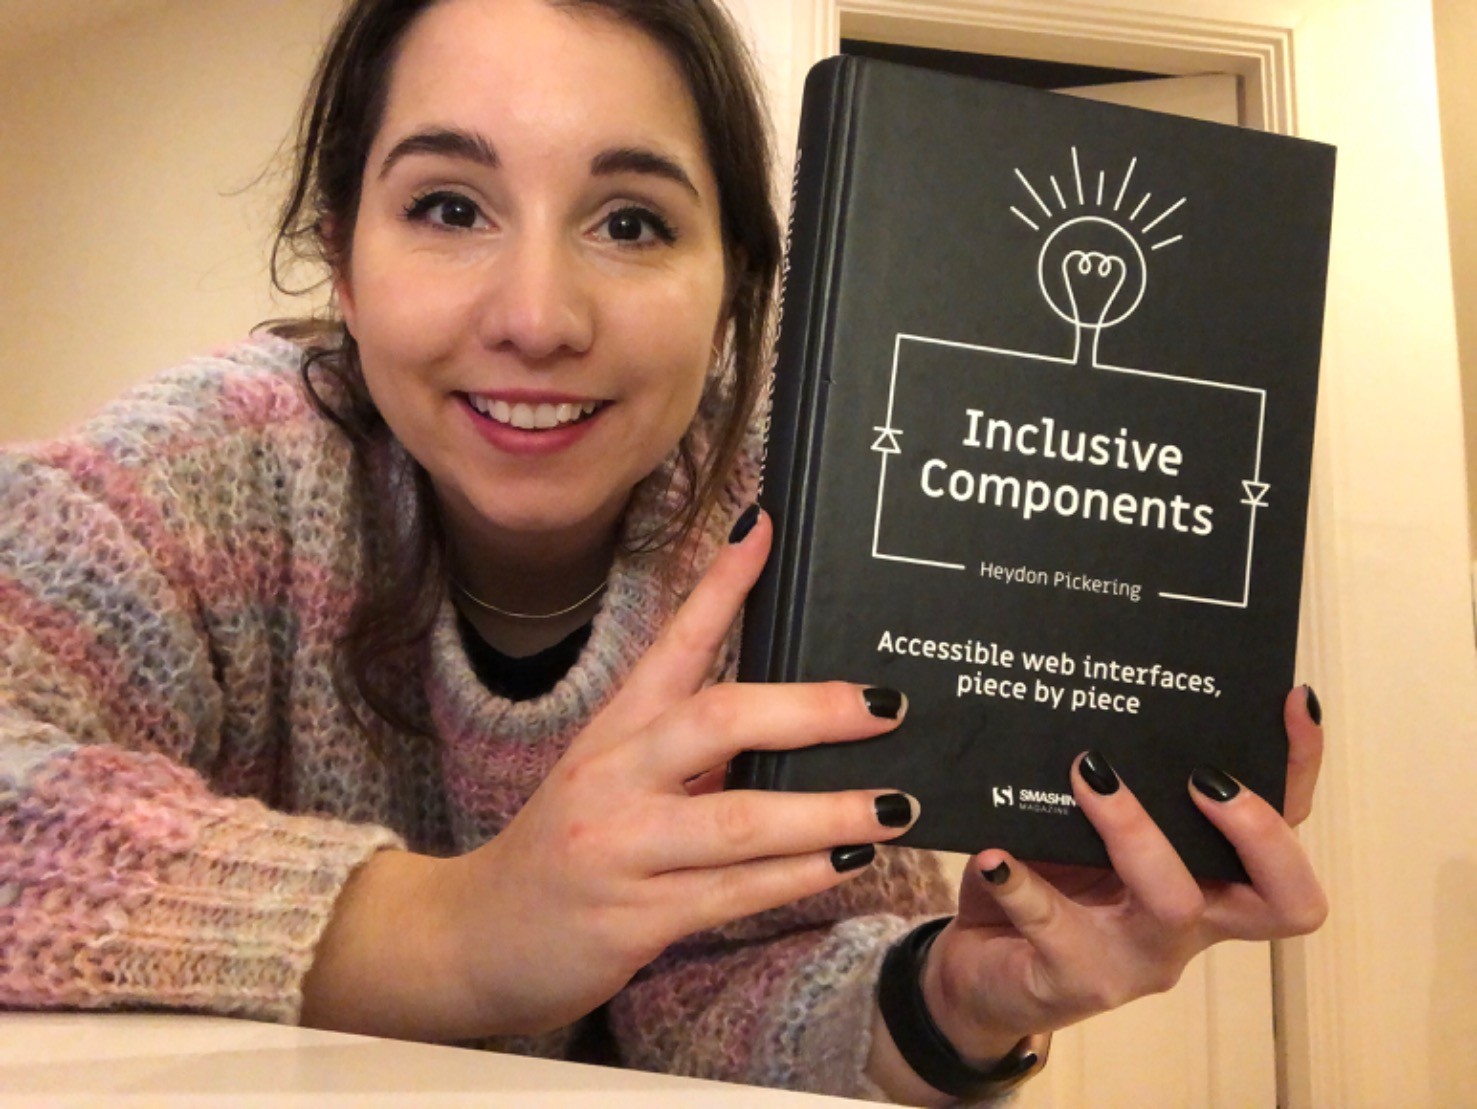 Me clutching a hardback copy of Heydon Pickering’s Inclusive Components book. The book is black and my nails are painted black.